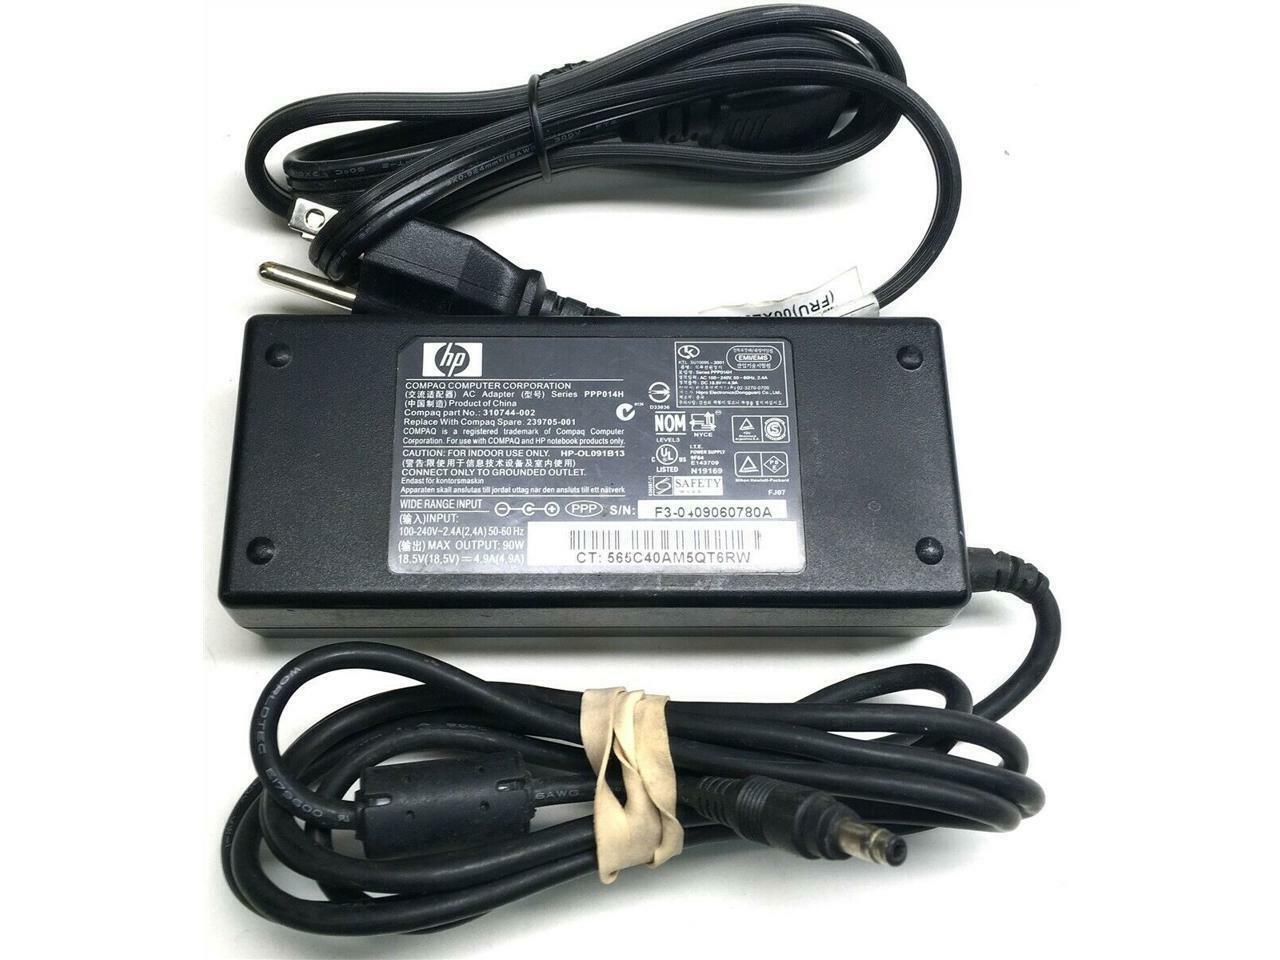 OEM HP Compaq Laptop AC Adapter Charger 18.5V 4.9A 310744-001.TESTED Good